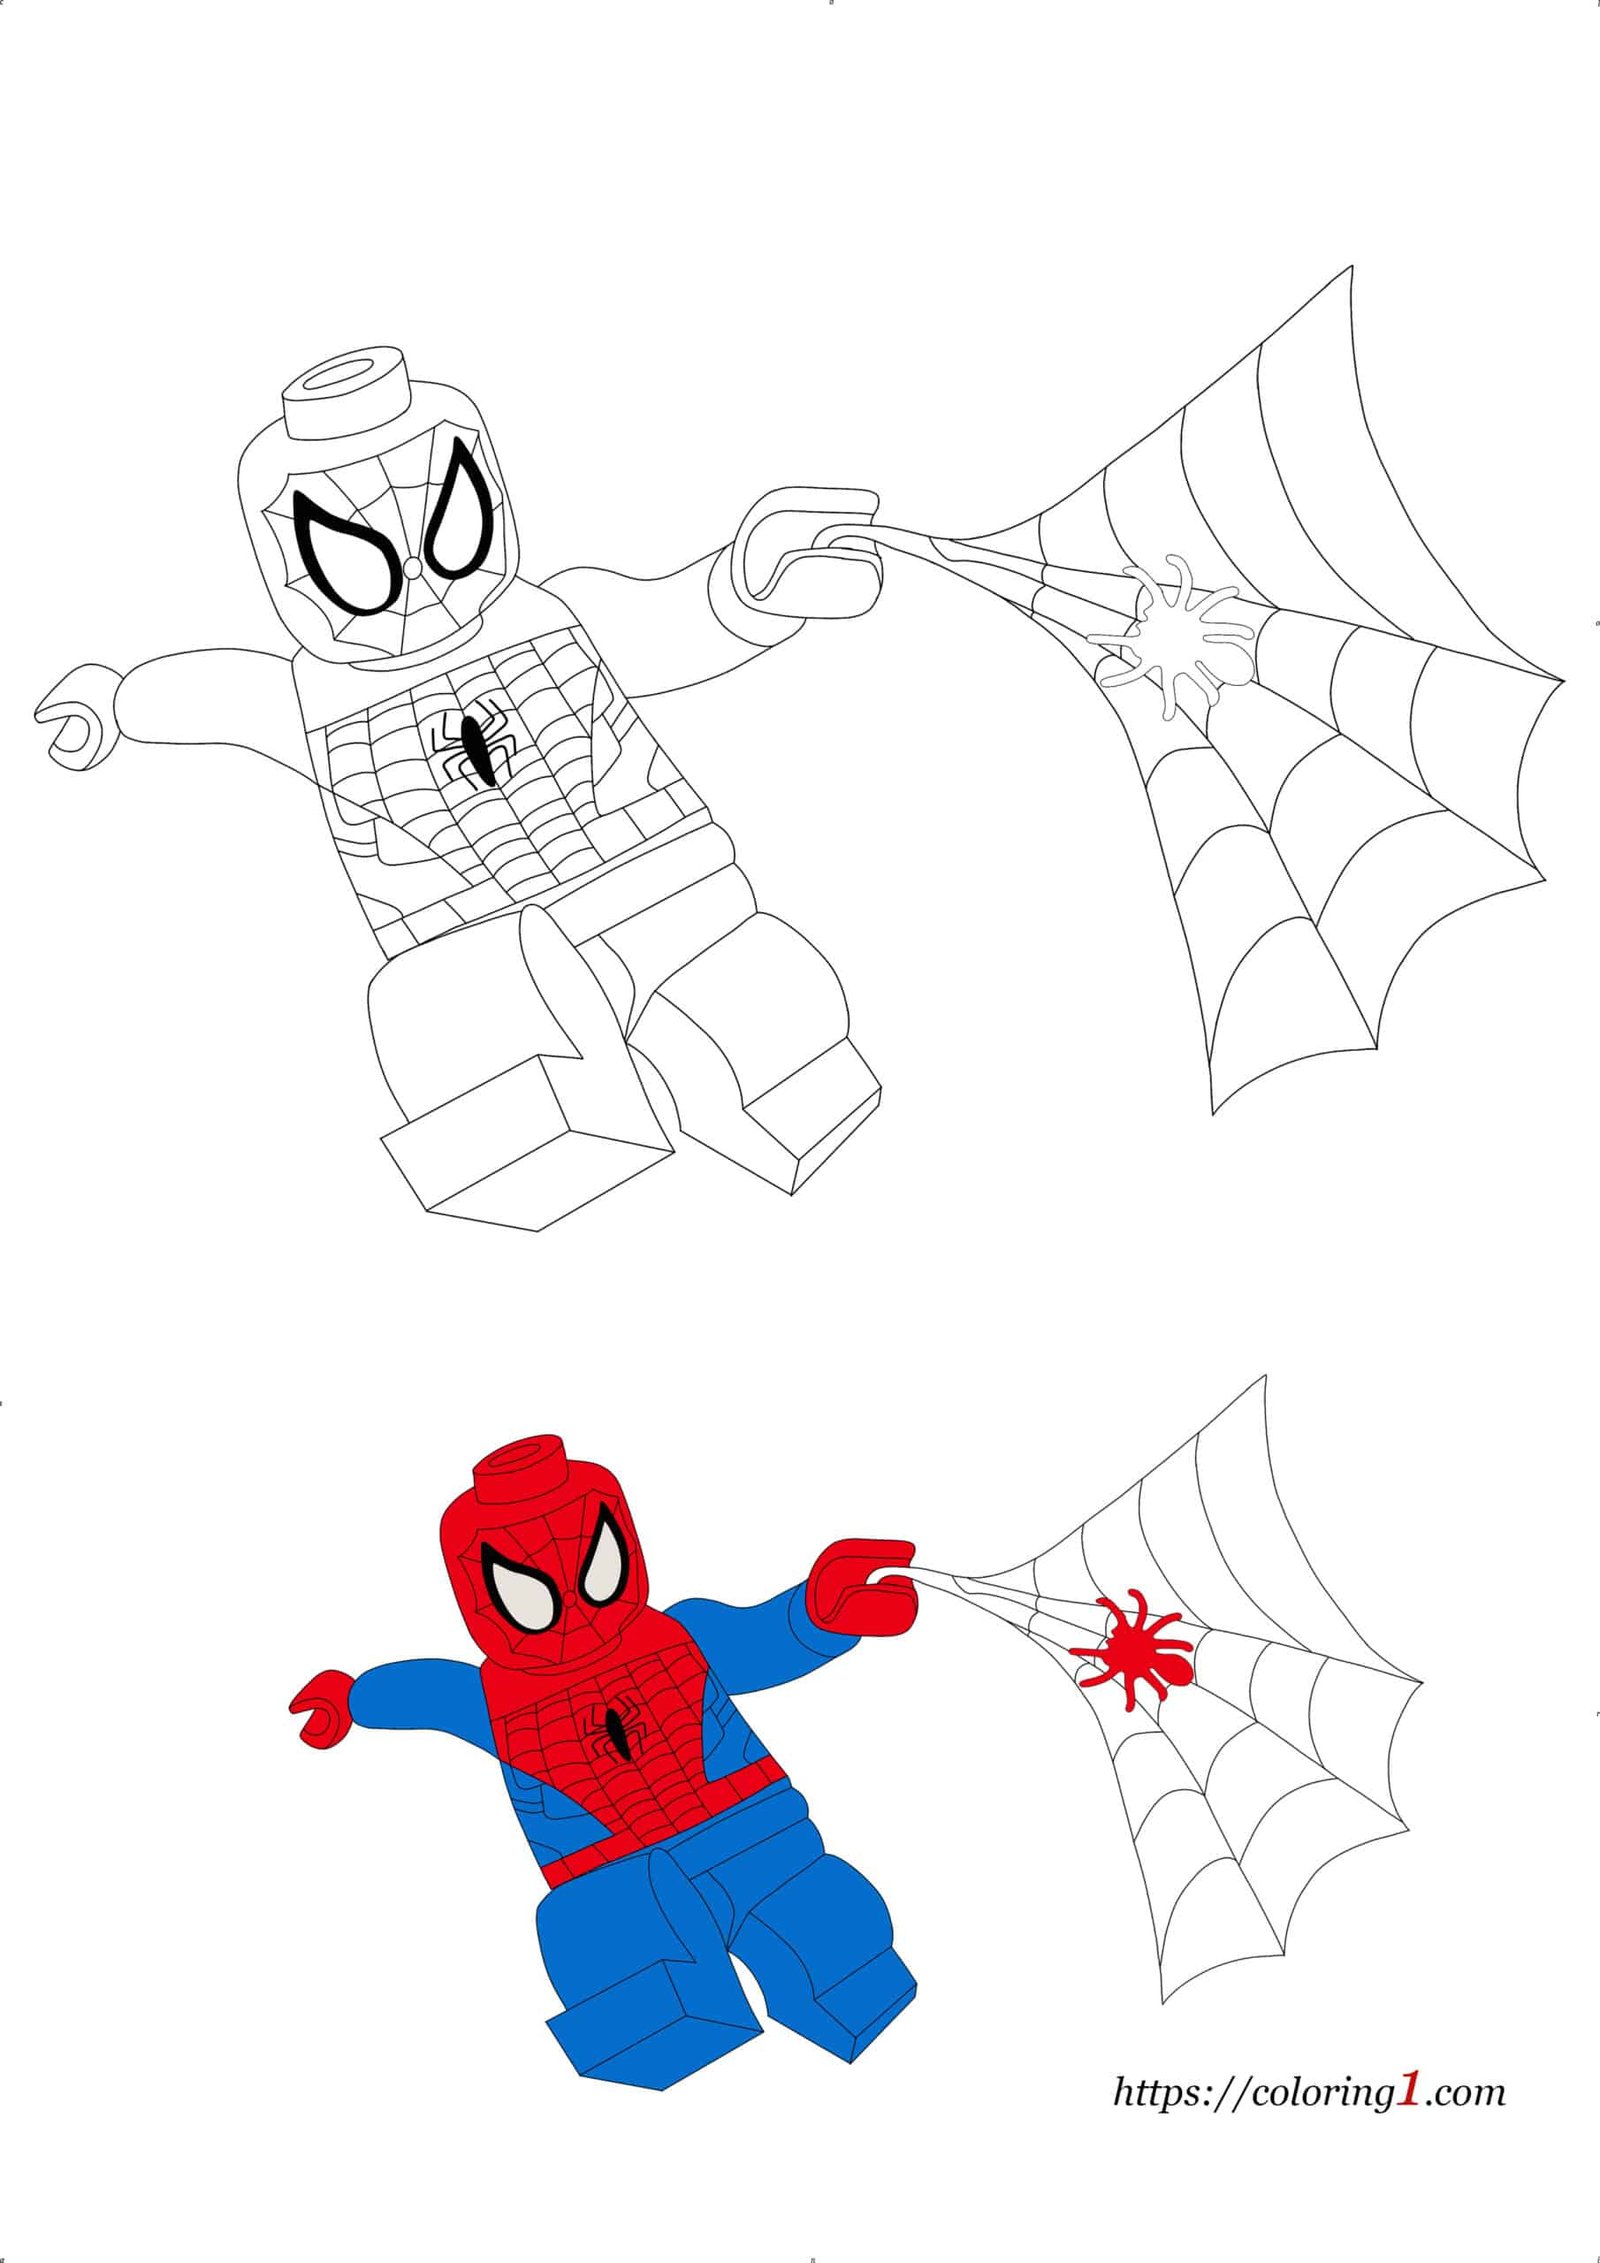 Lego spiderman coloring pages